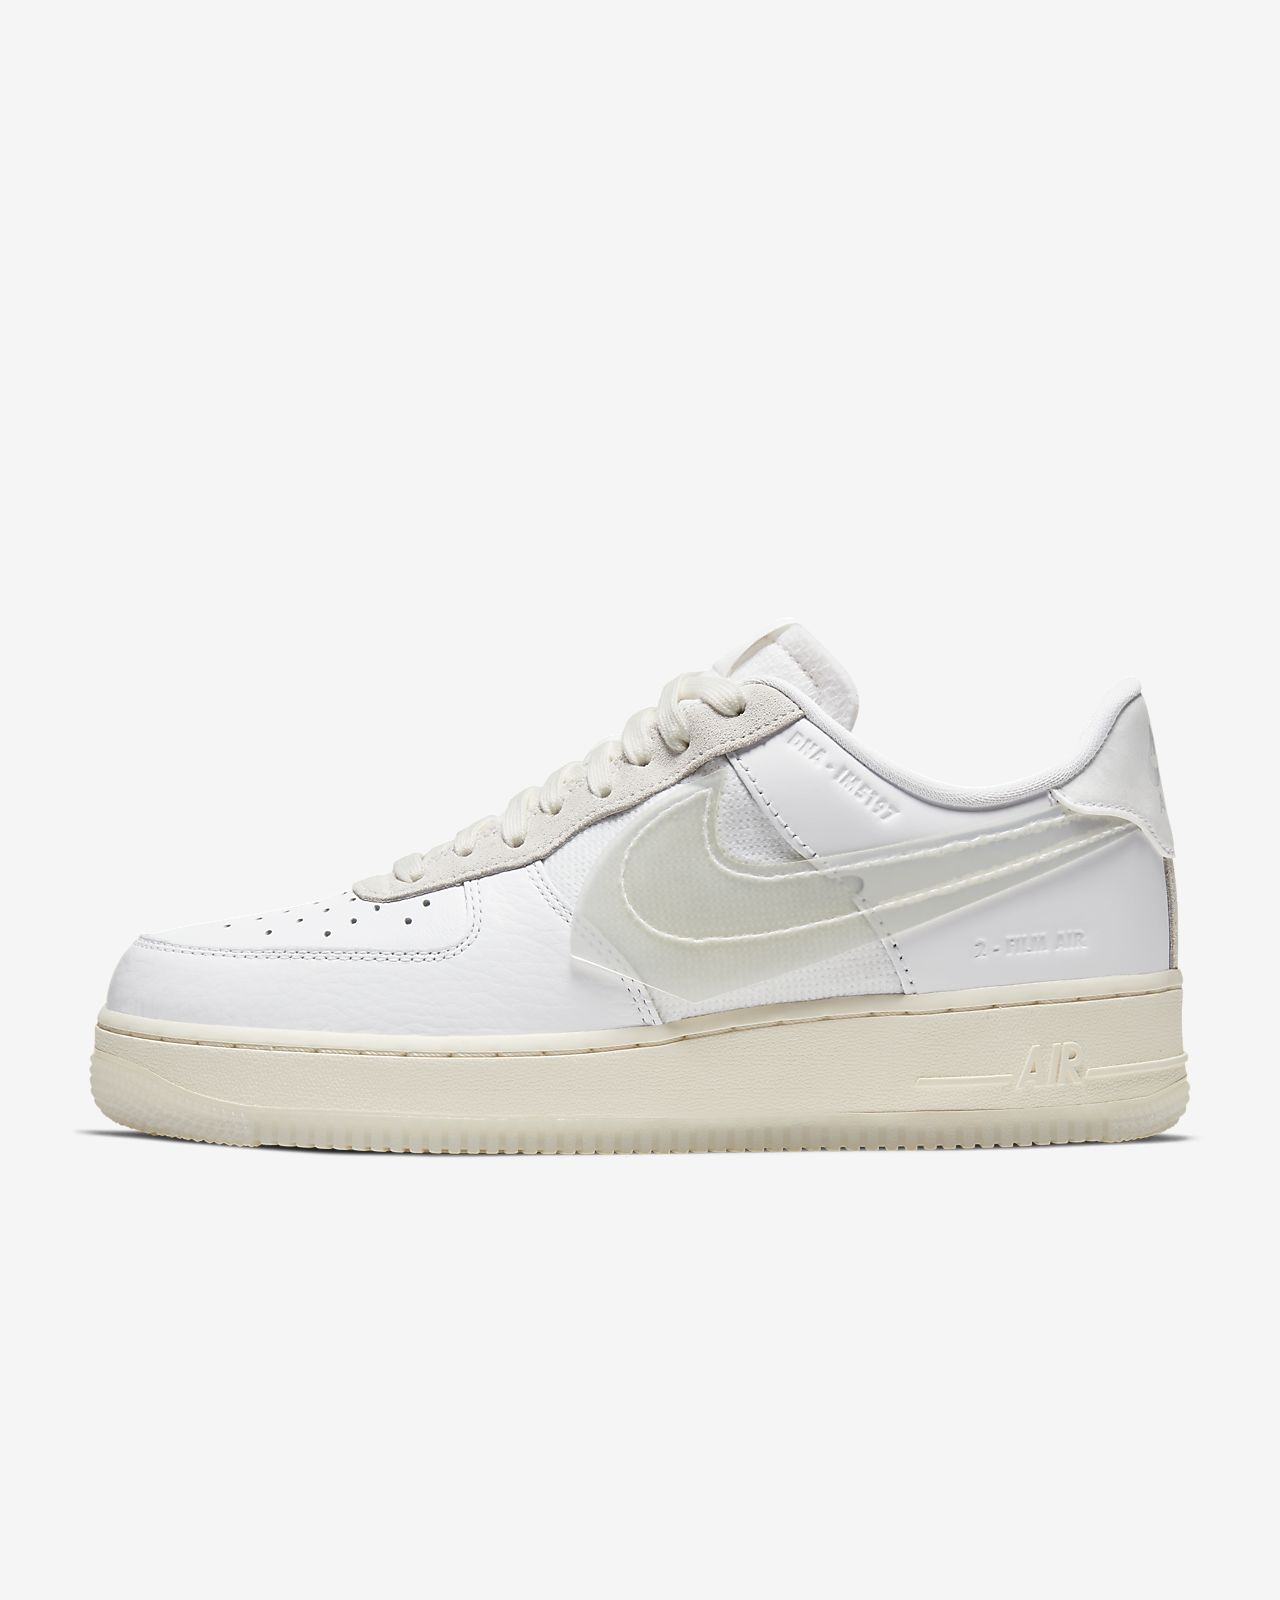 nike air force 1 hombre beige